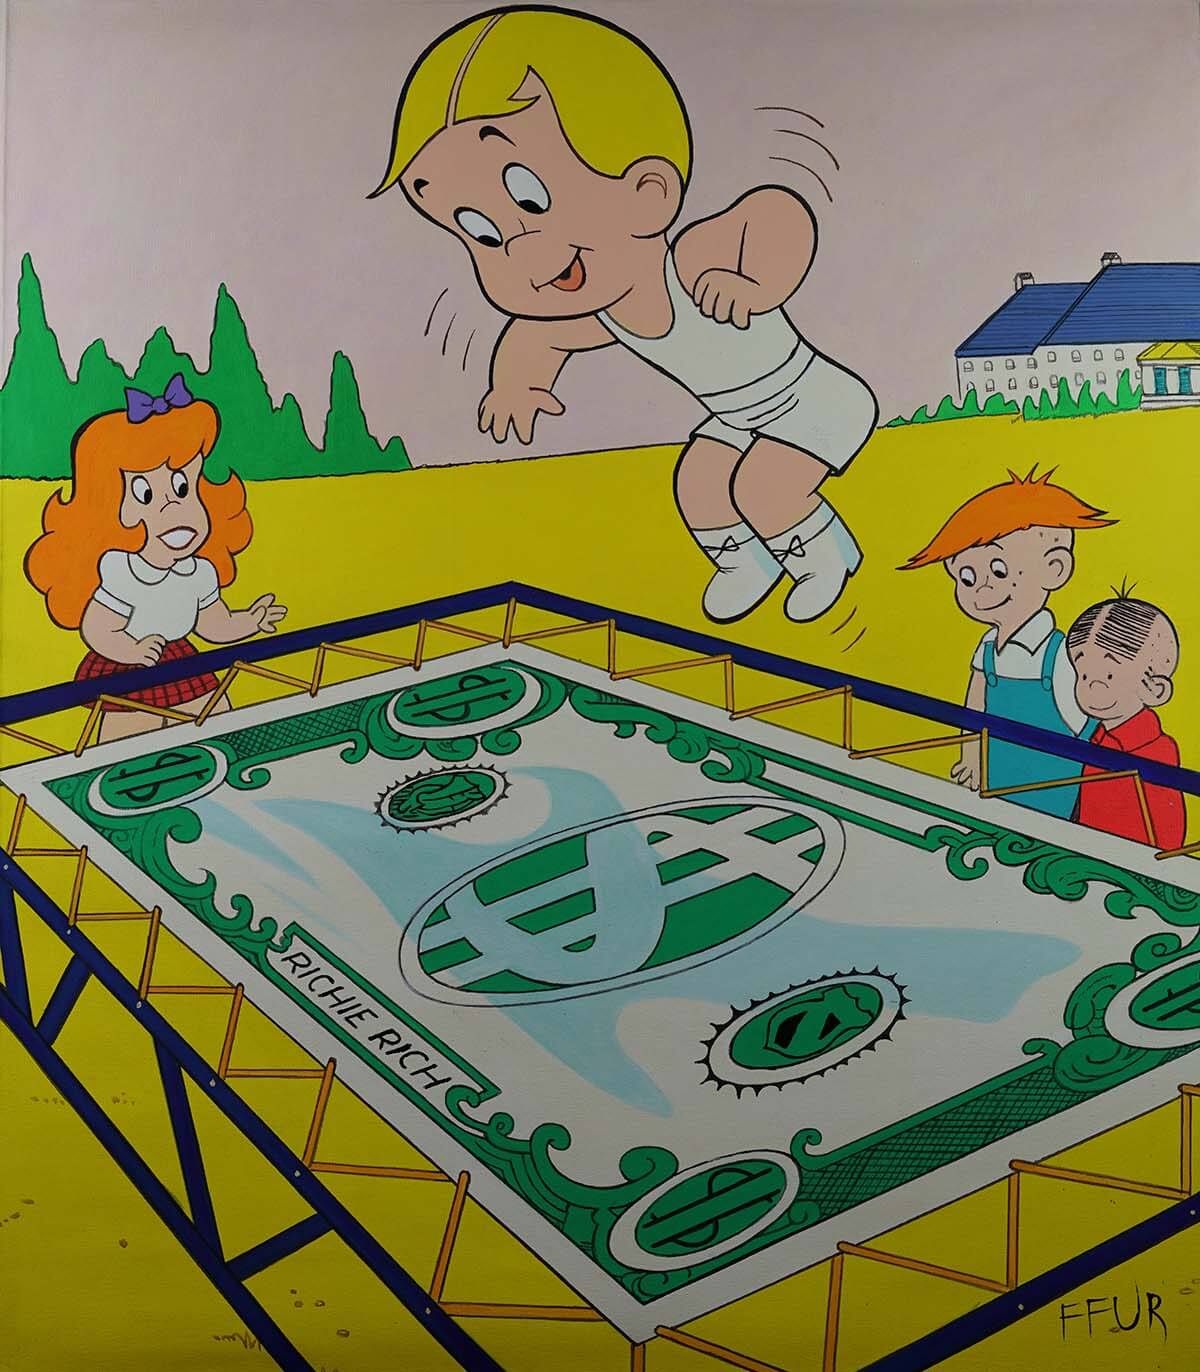 Independent: A Striking and Bold Canvas Art Piece by FFUR, Featuring Richie Rich Taking Charge of His Financial Future with Confidence.